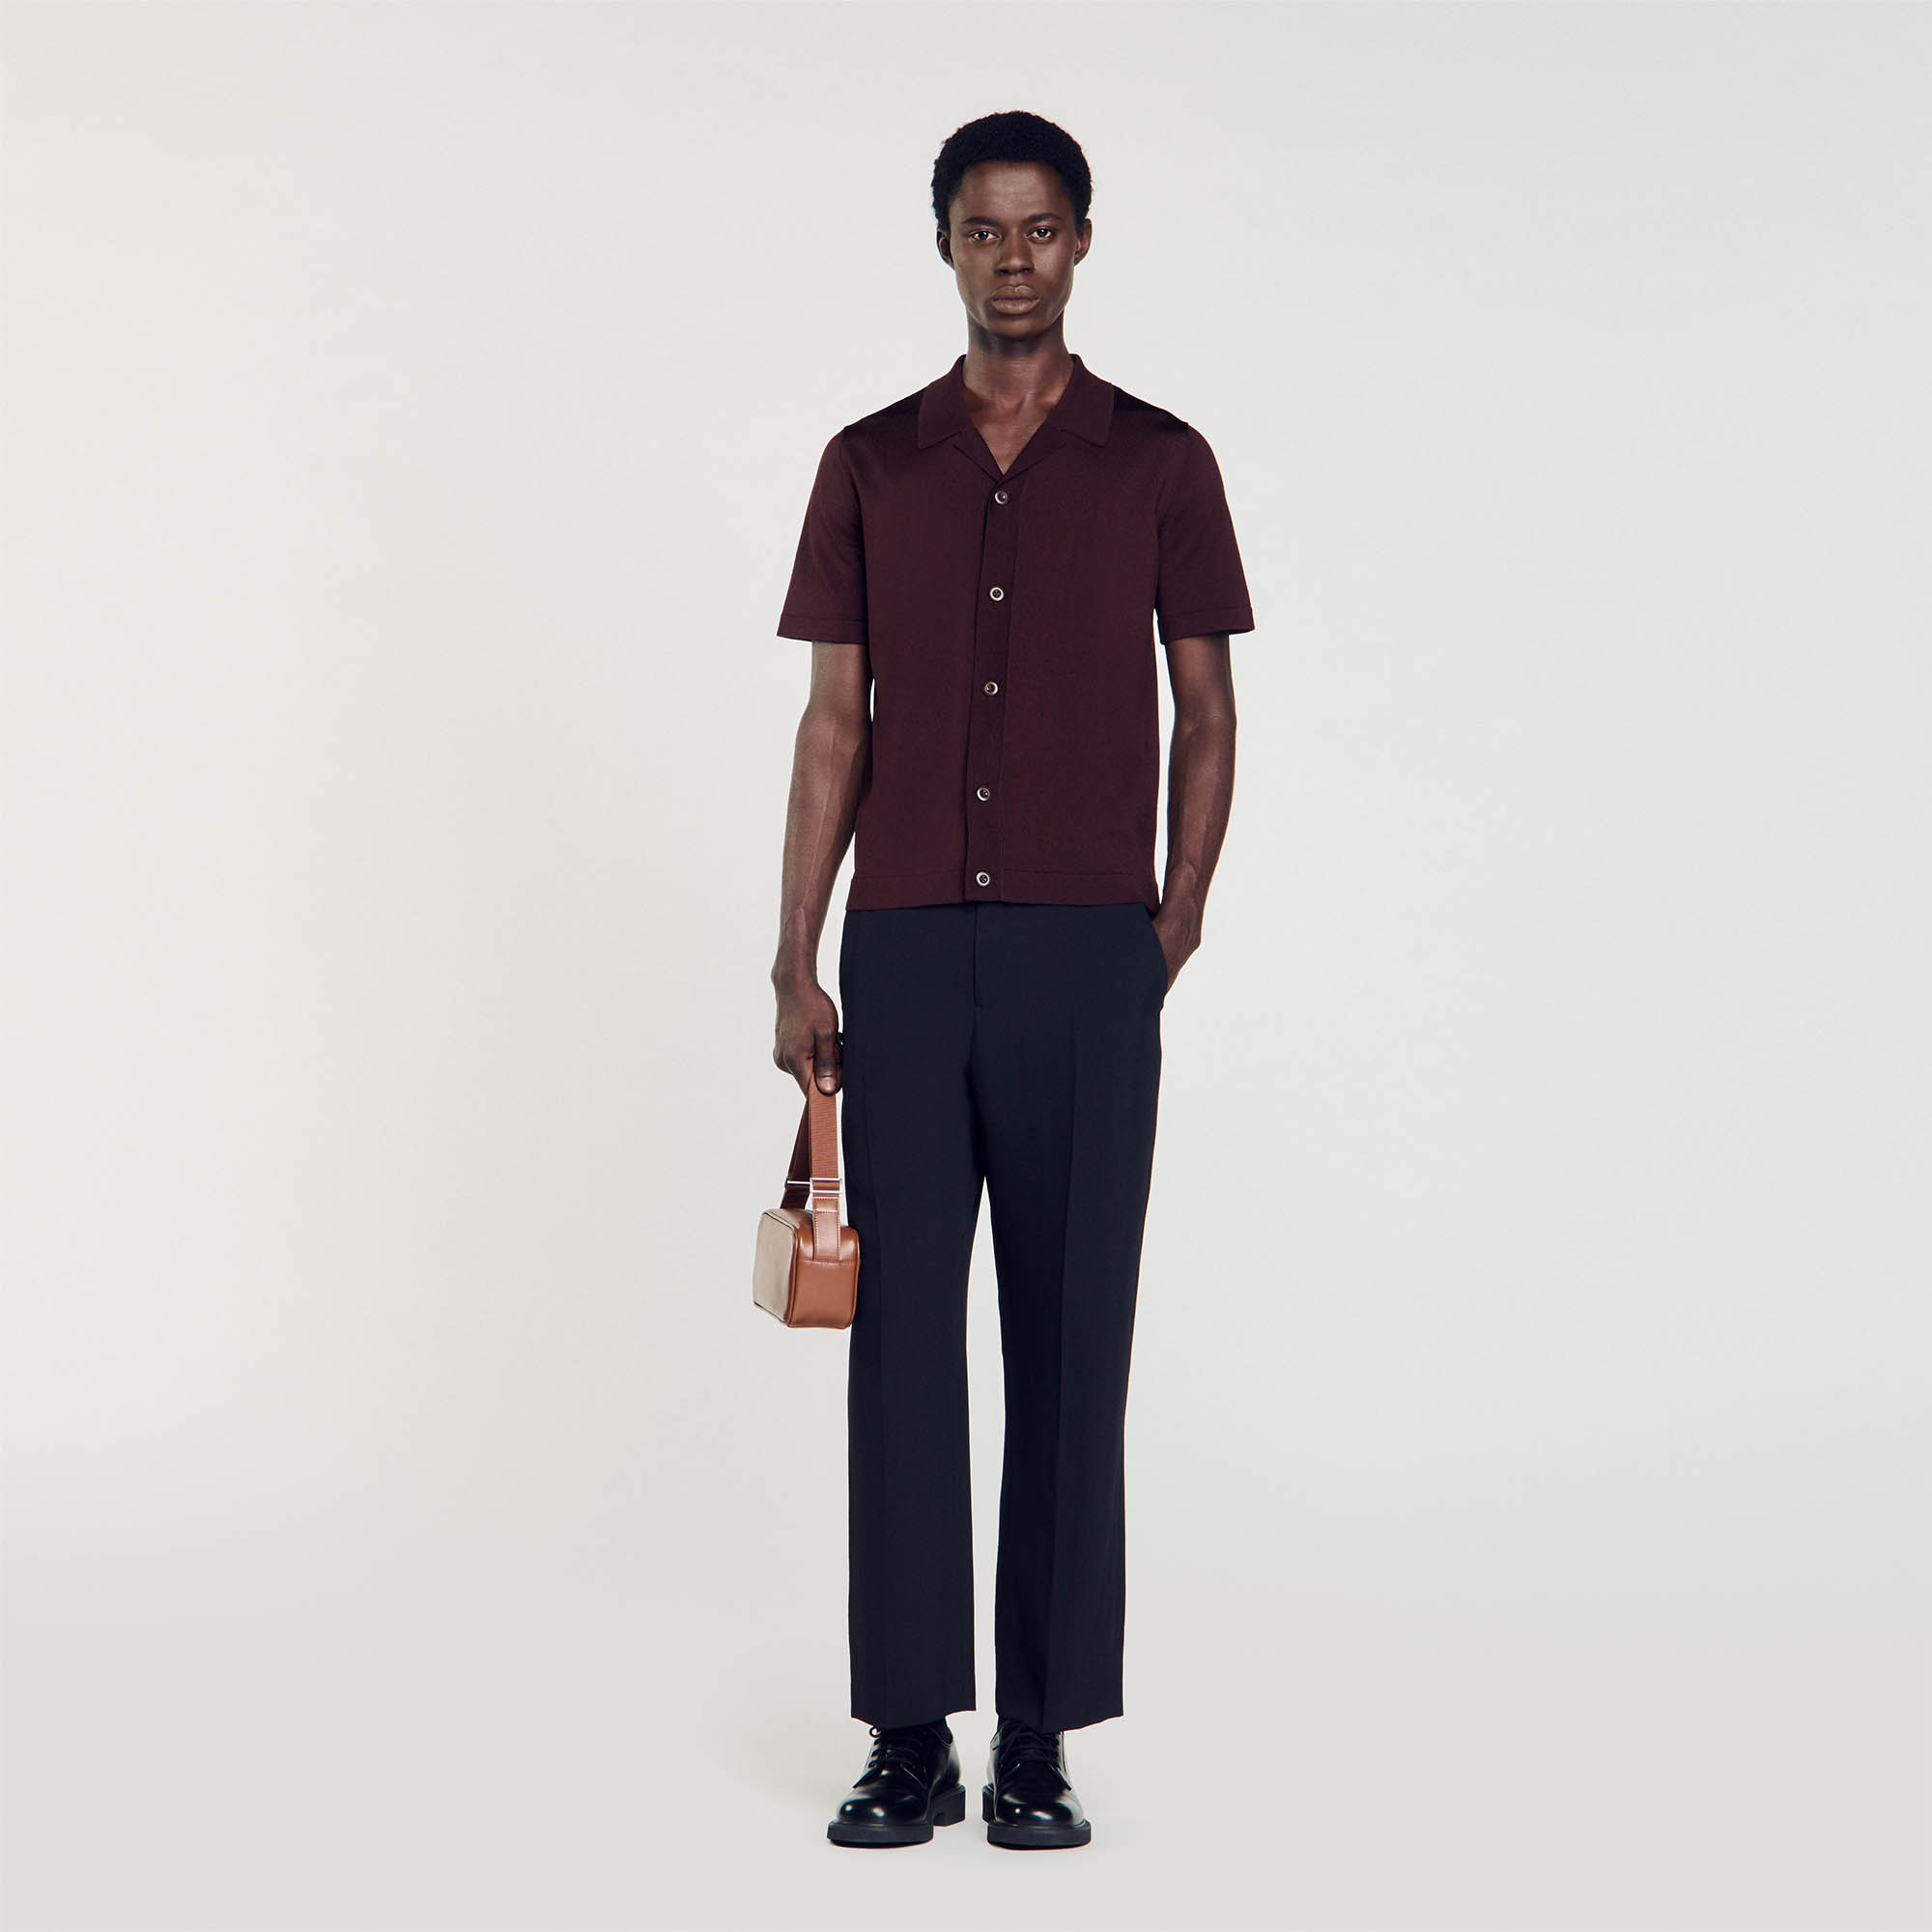 Sandro viscose Flowing short-sleeved shirt with a button fastening and a spread collar